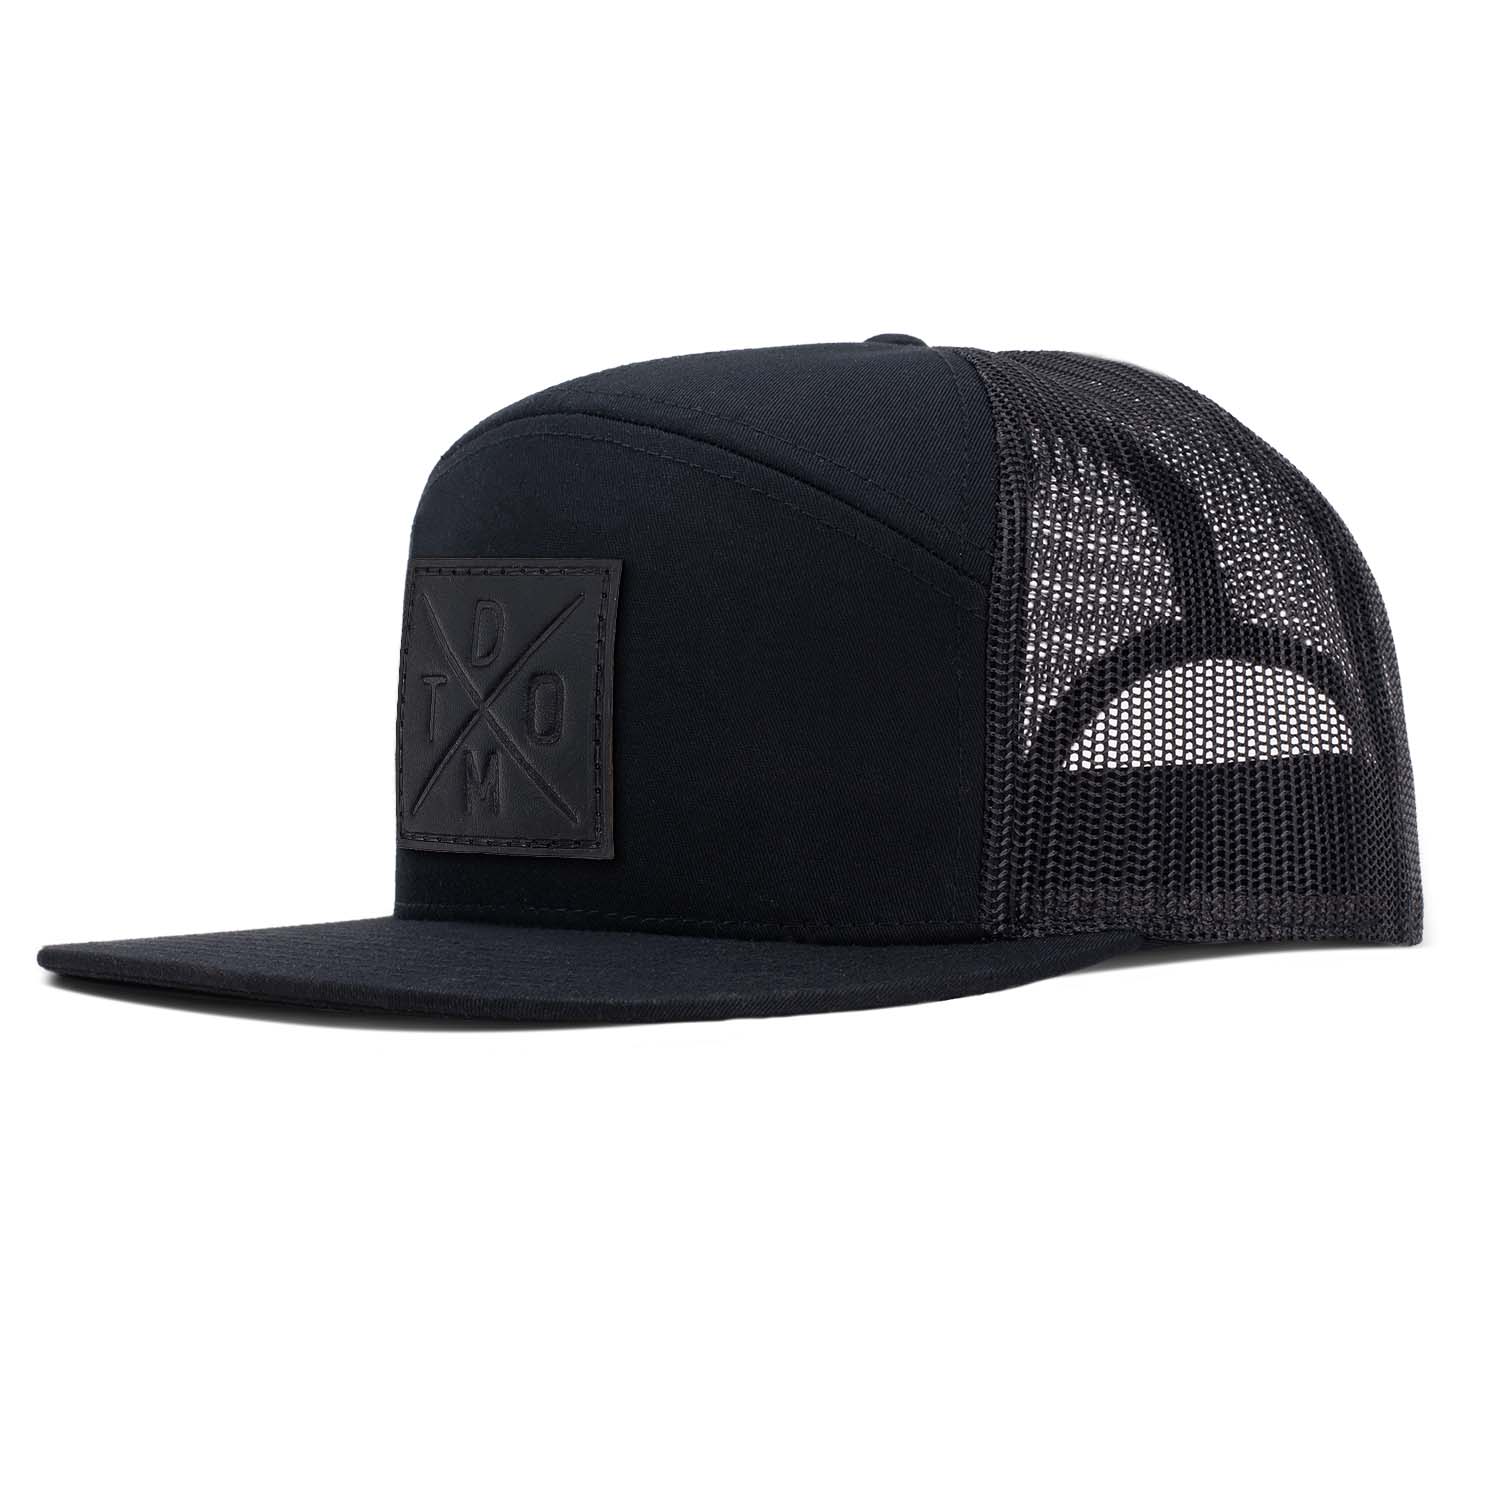 Revolution Mfg black with black mesh 7 panel trucker featuring our black DTOM debossed full grain leather patch.